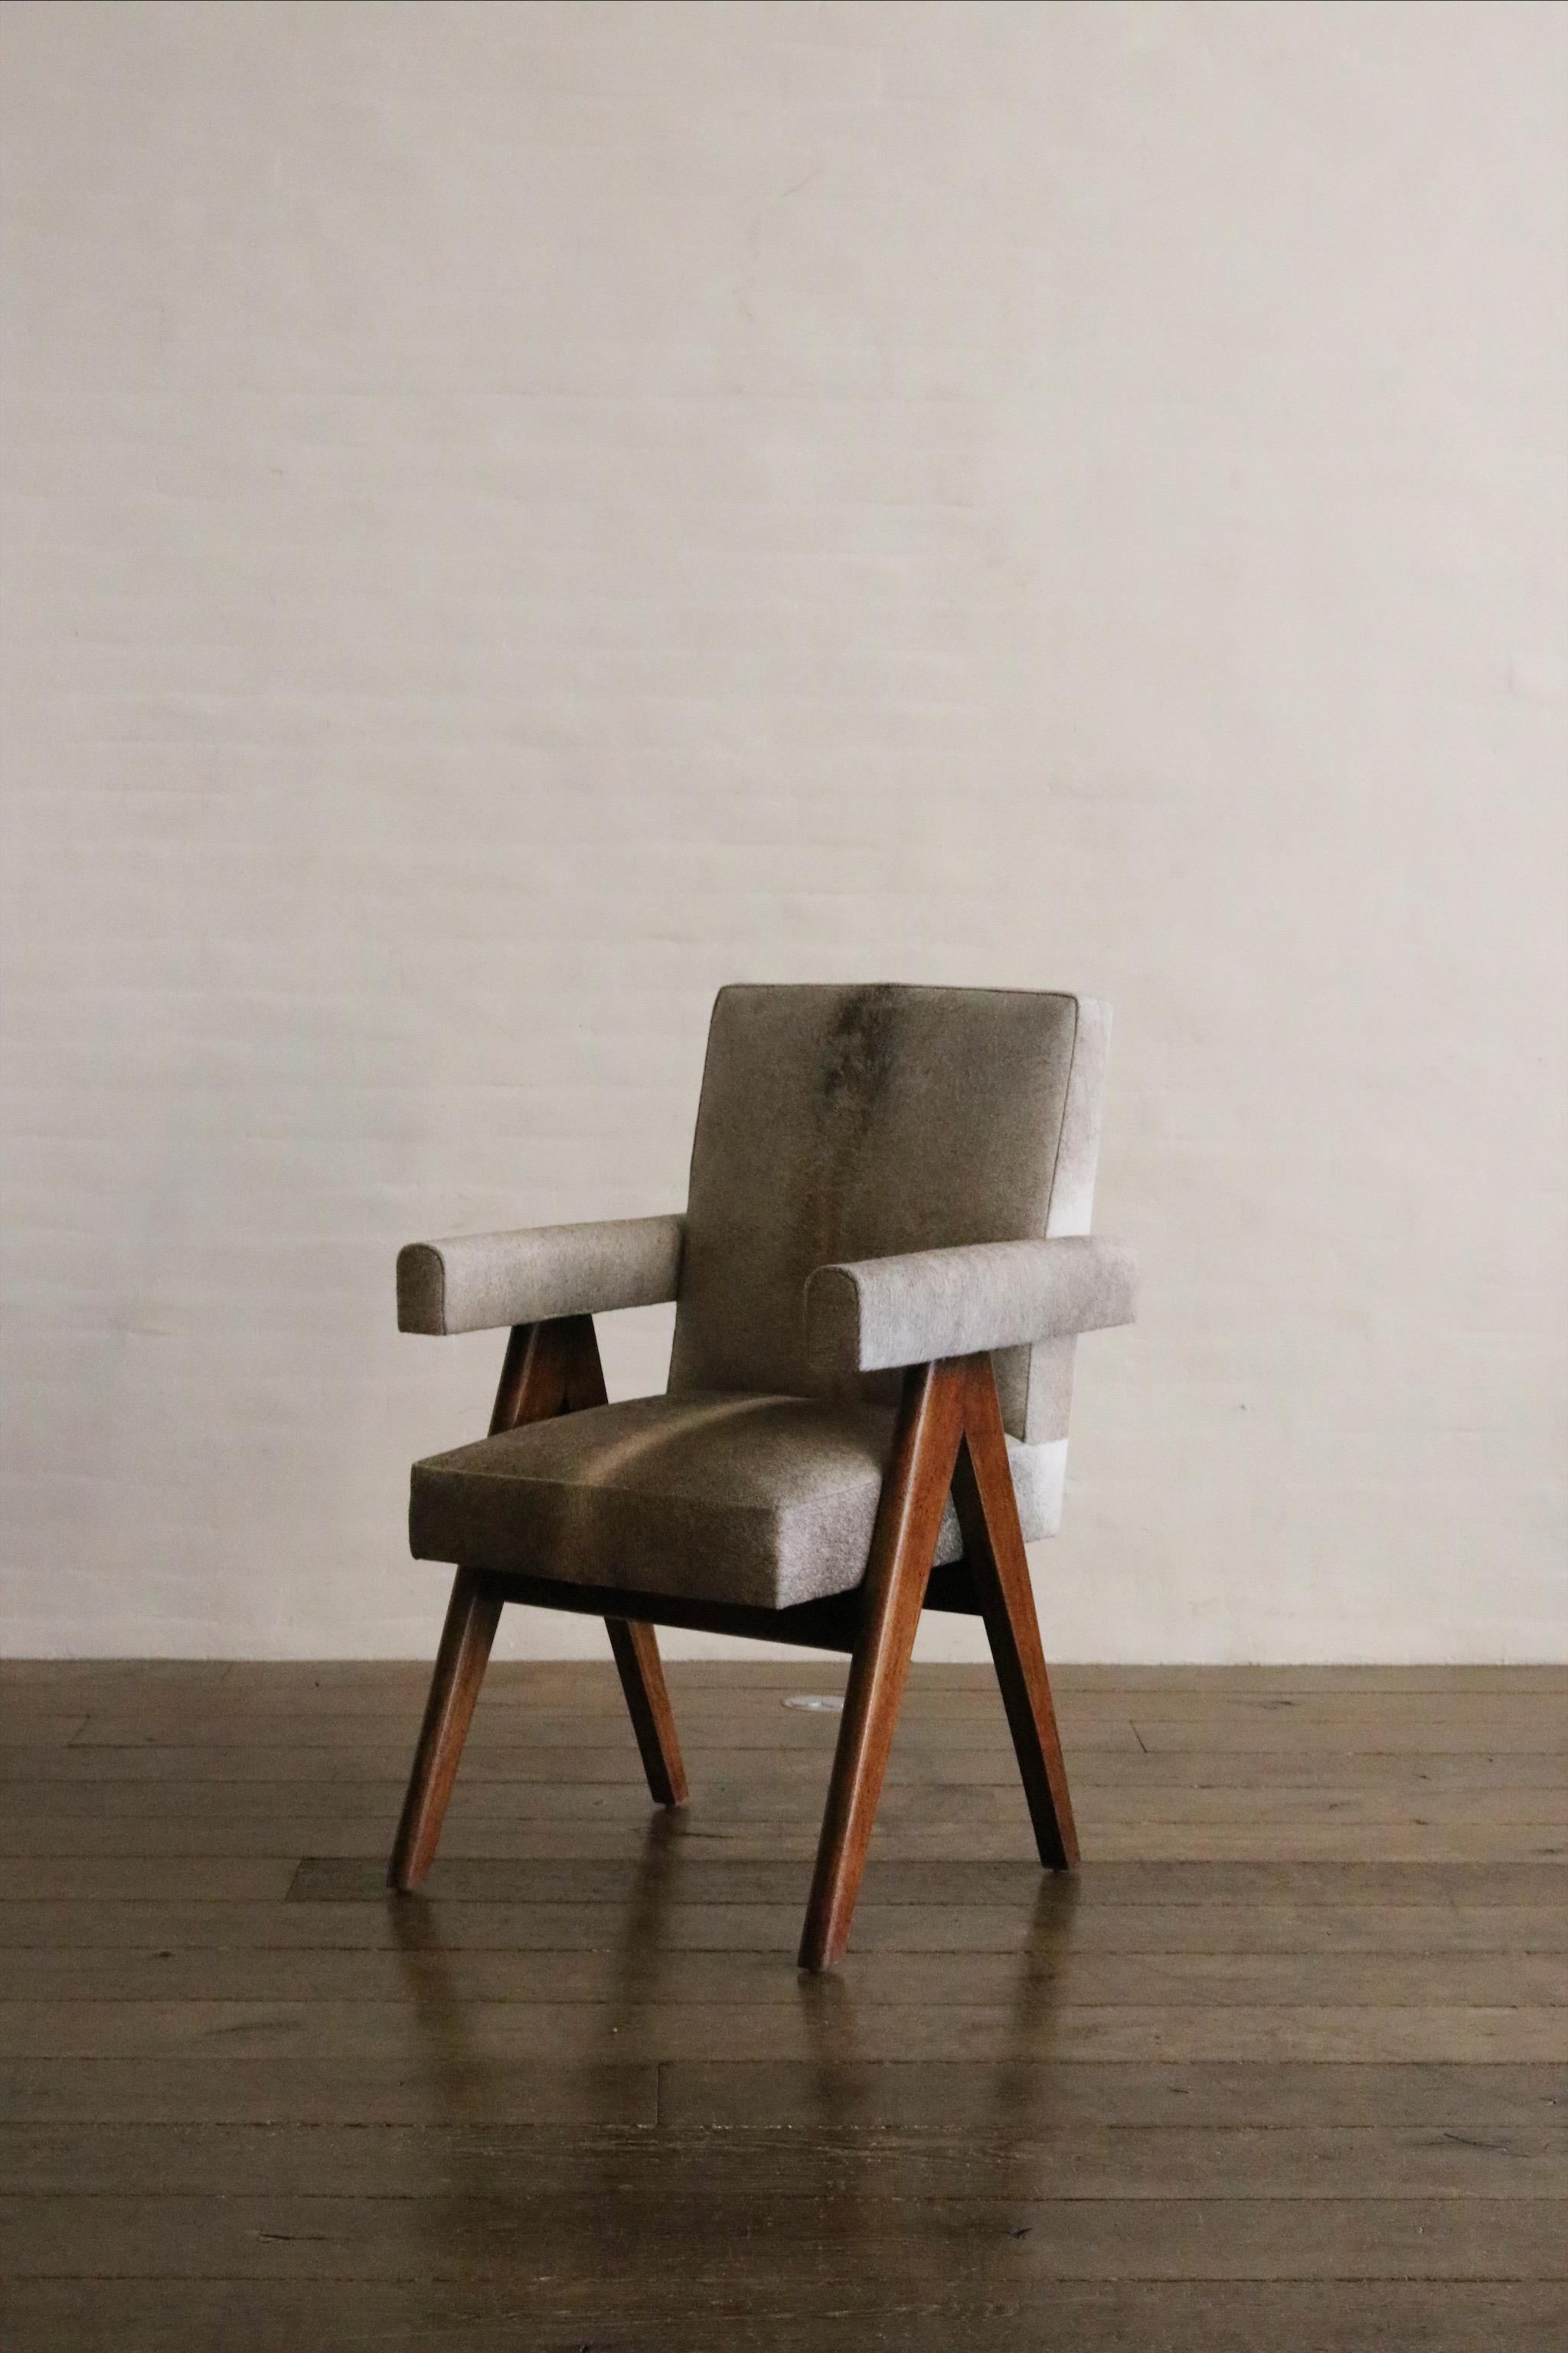 Mid-Century Modern Pierre Jeanneret Senate-Comittee Reupholstered Arm Chair in Teak, ca. 1950s For Sale